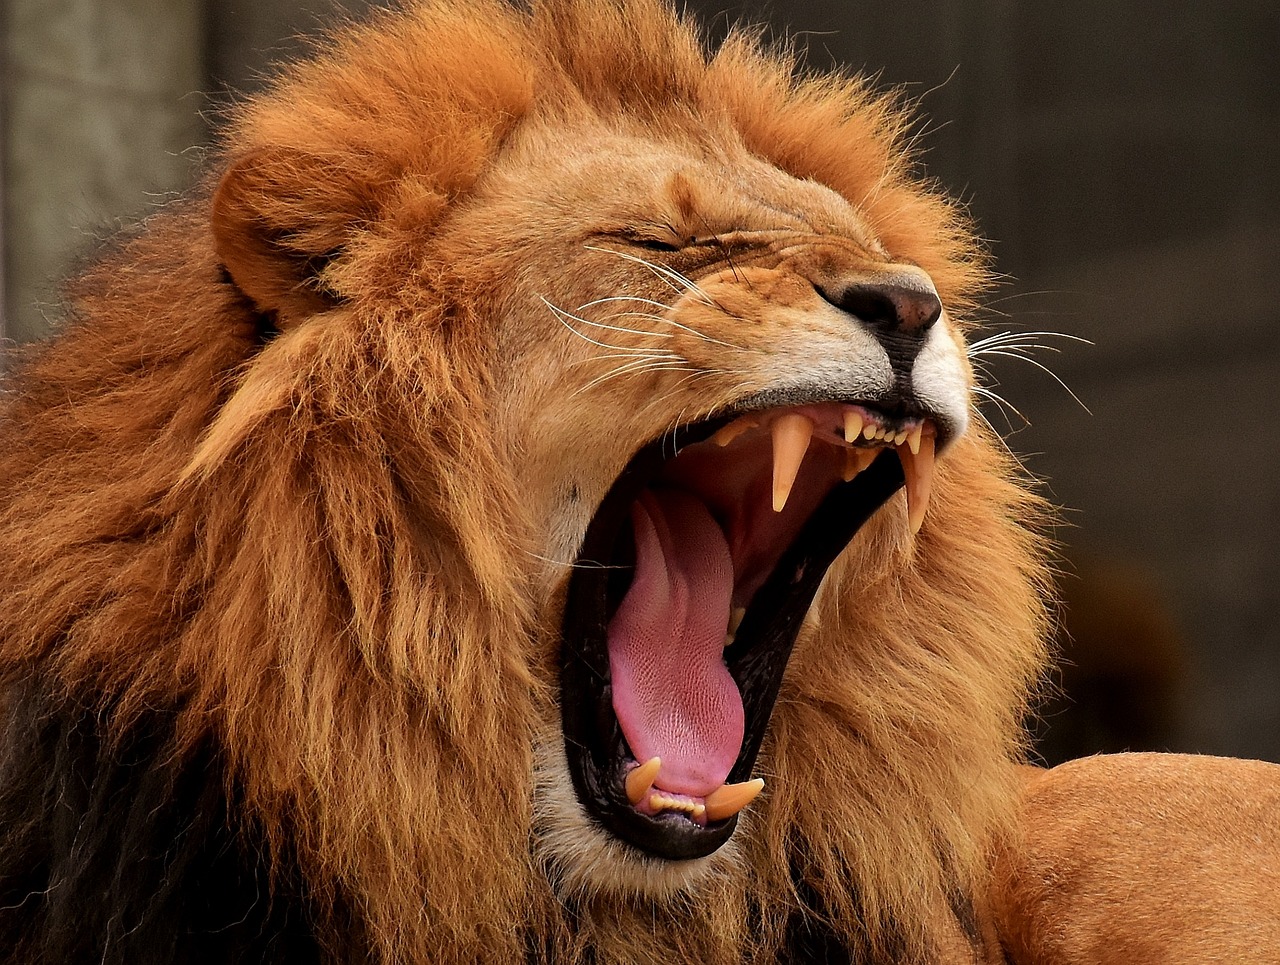 a lion yawns in a zoo enclosure